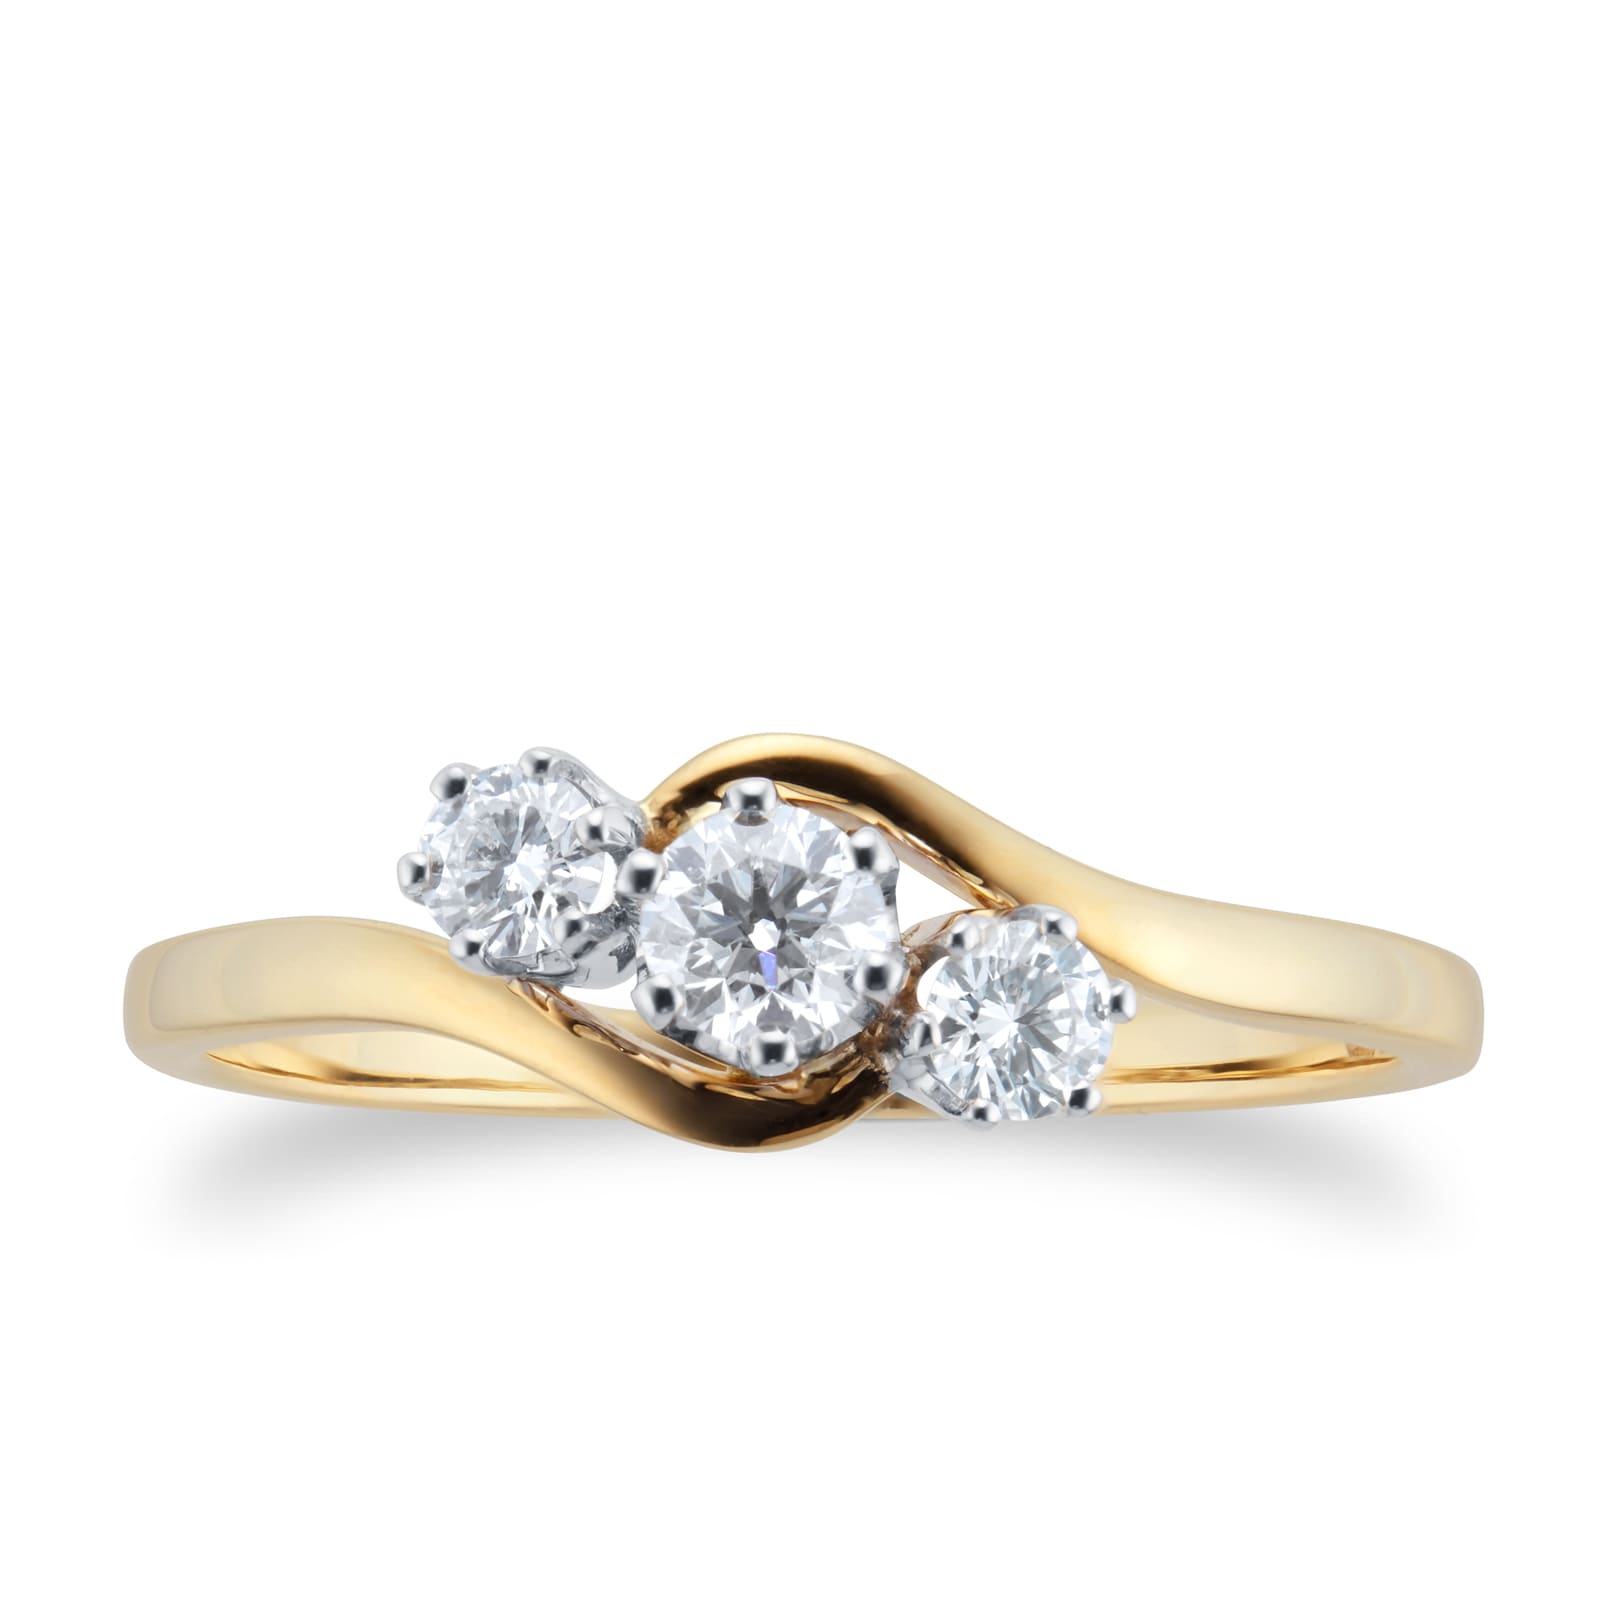 18ct Yellow Gold 0.50cttw Brilliant Cut 3 Stone Diamond Ring - Ring Size D.5